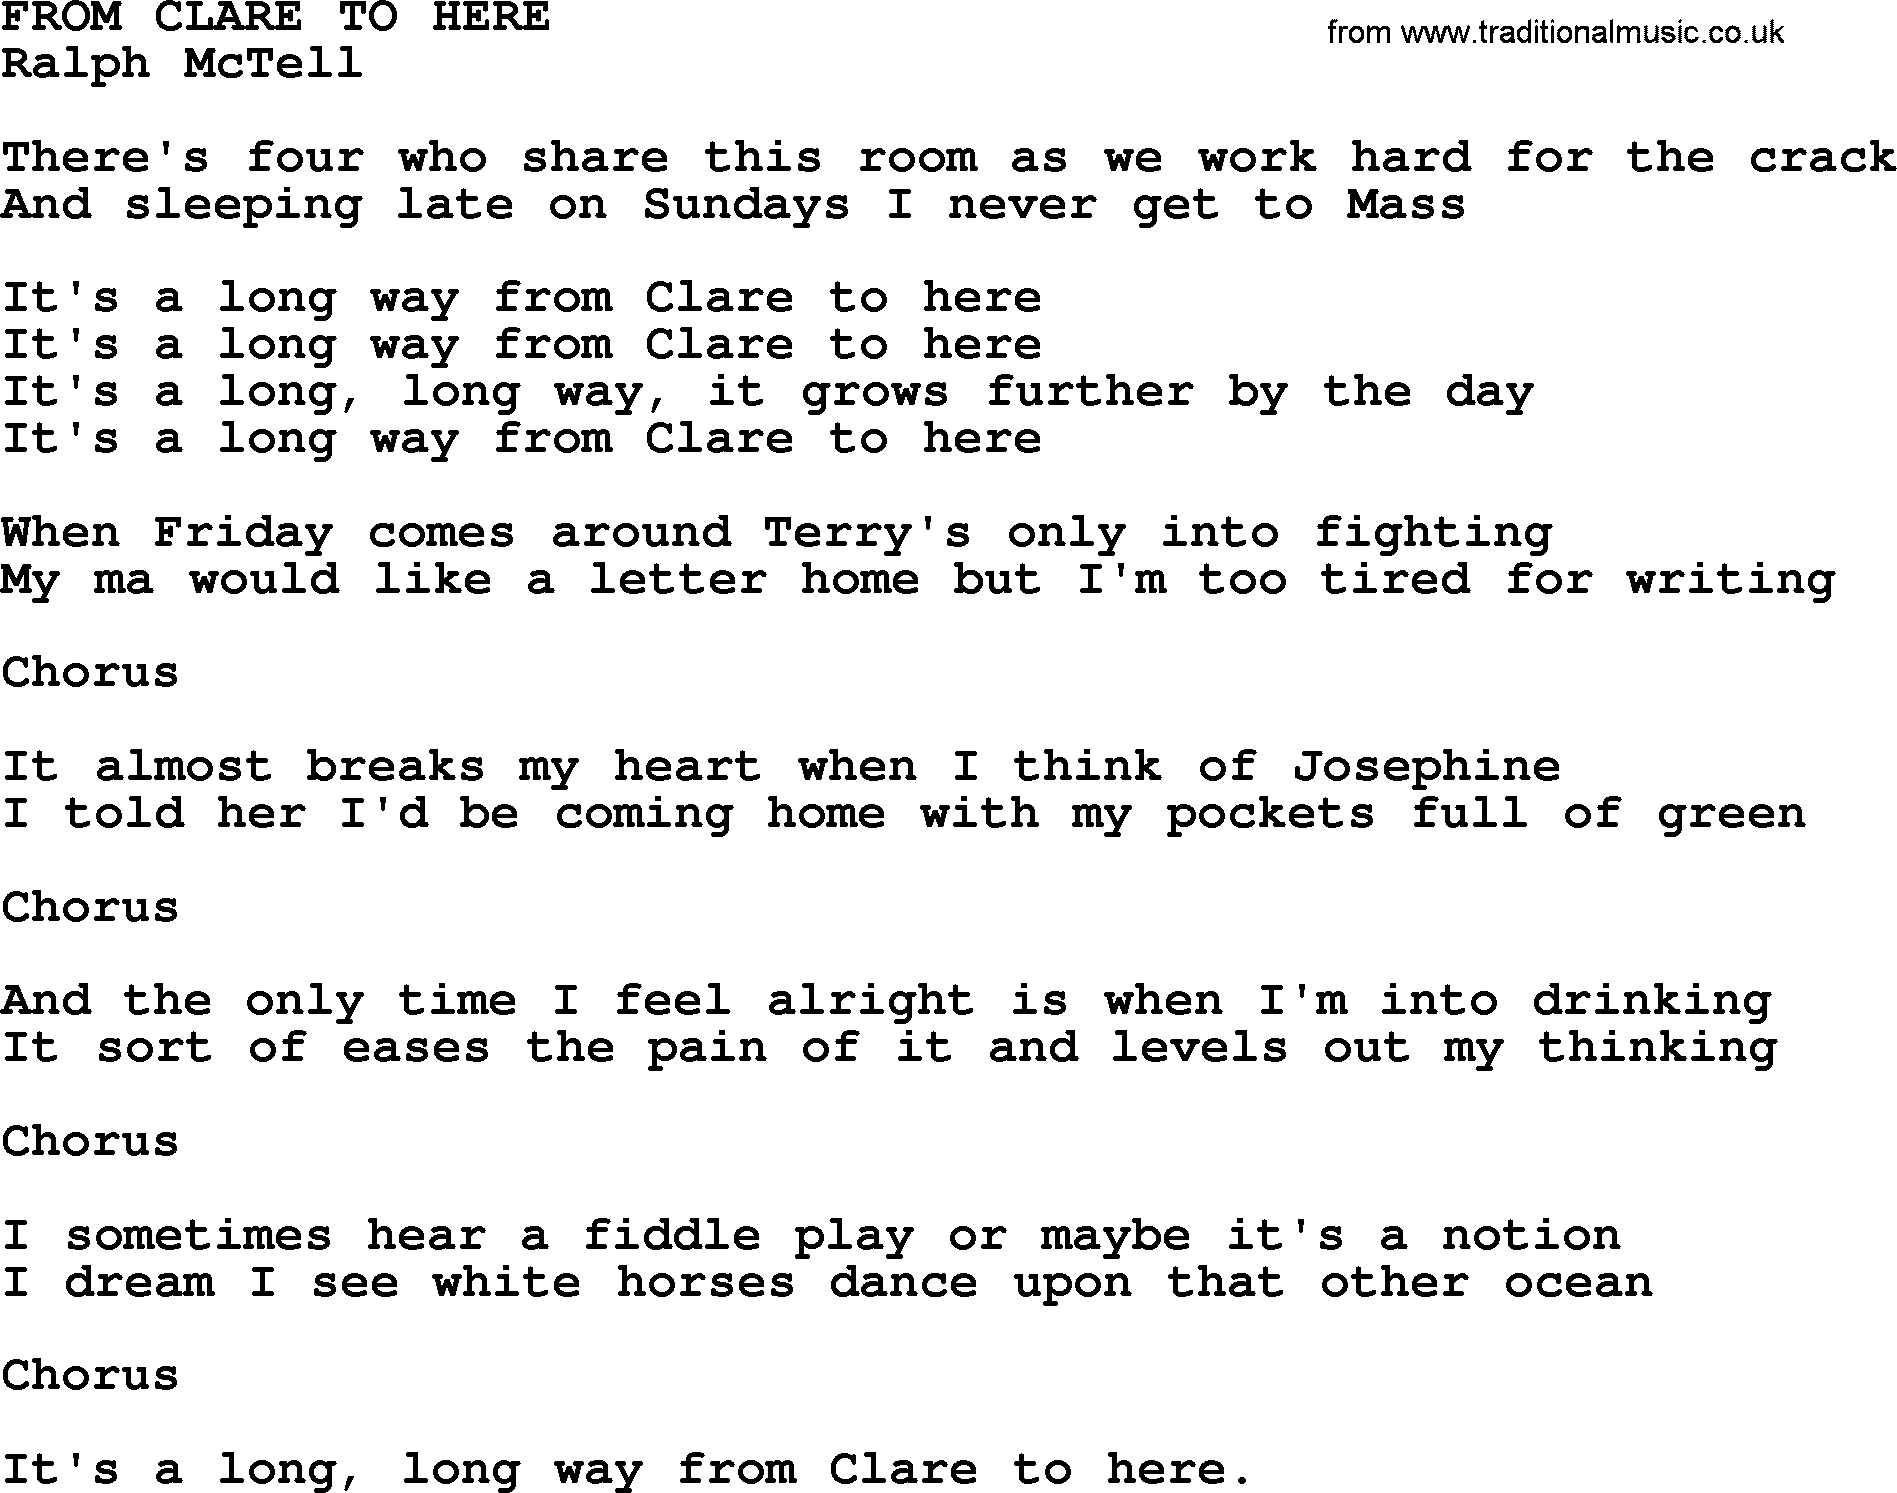 Ralph McTell Song: From Clare To Here, lyrics